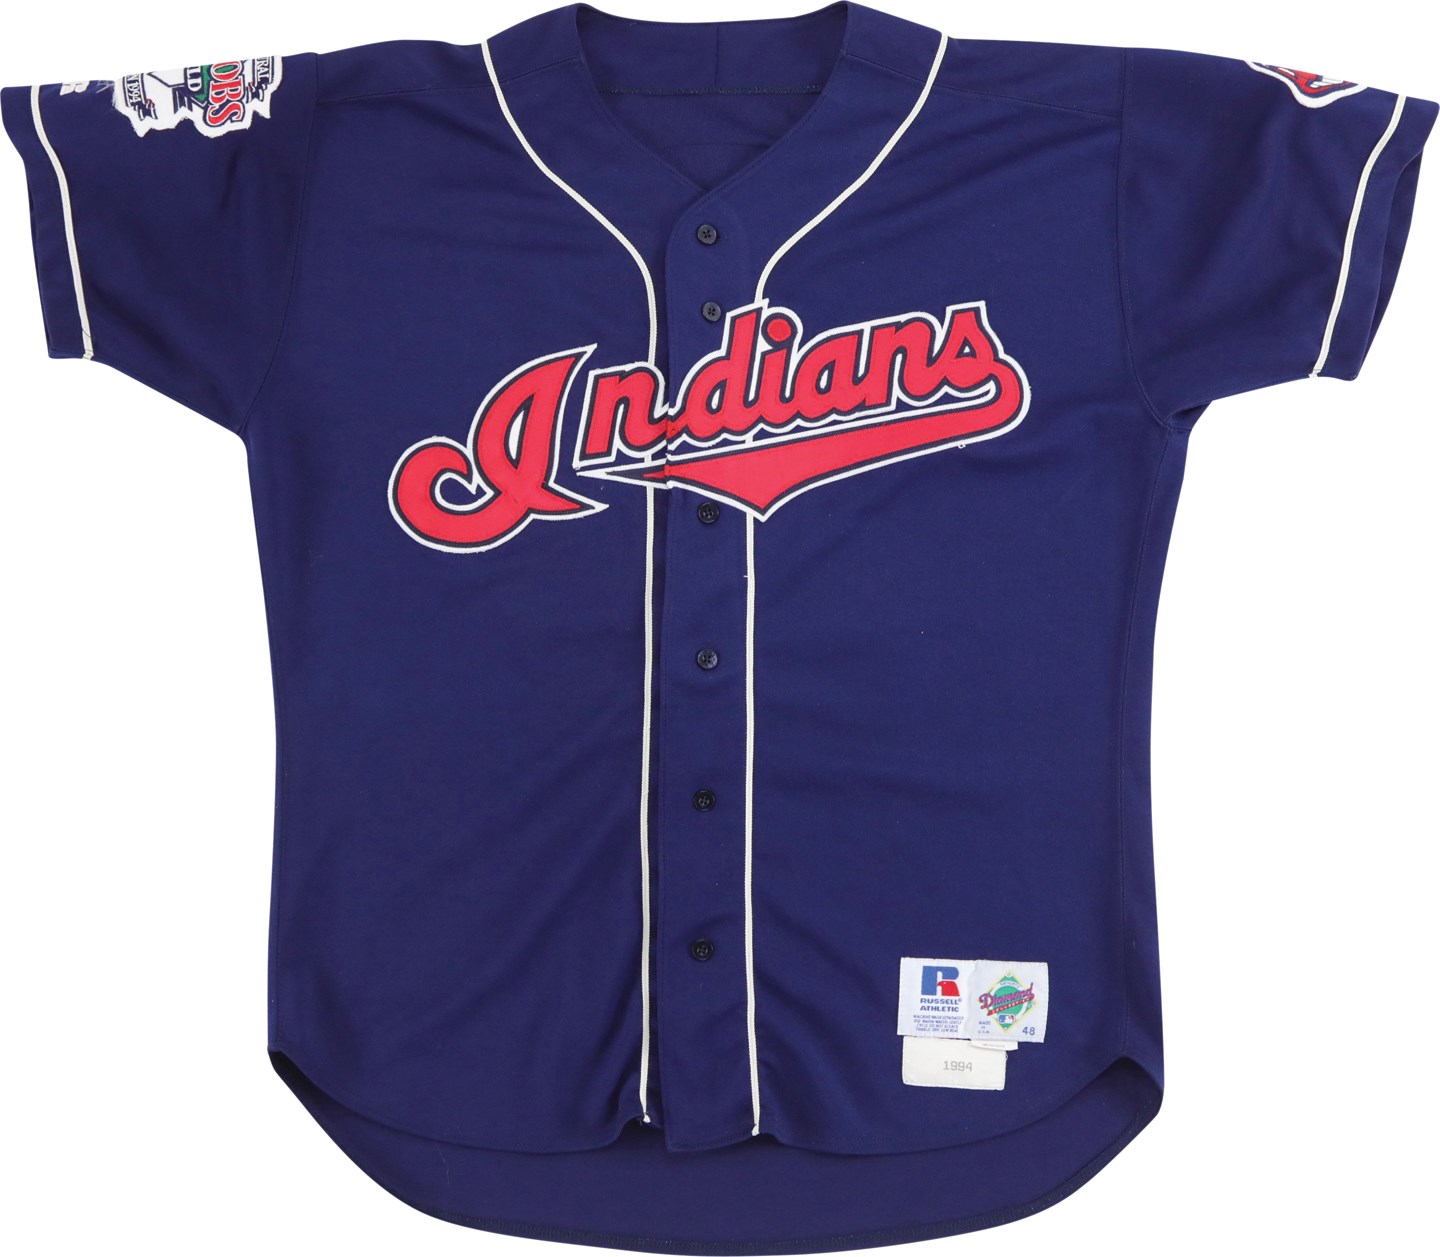 - 1994 Eddie Murray Career Hits #2,868 and #2,869 Cleveland Indians Game Worn Jersey (Photo-Matched to Three Games)